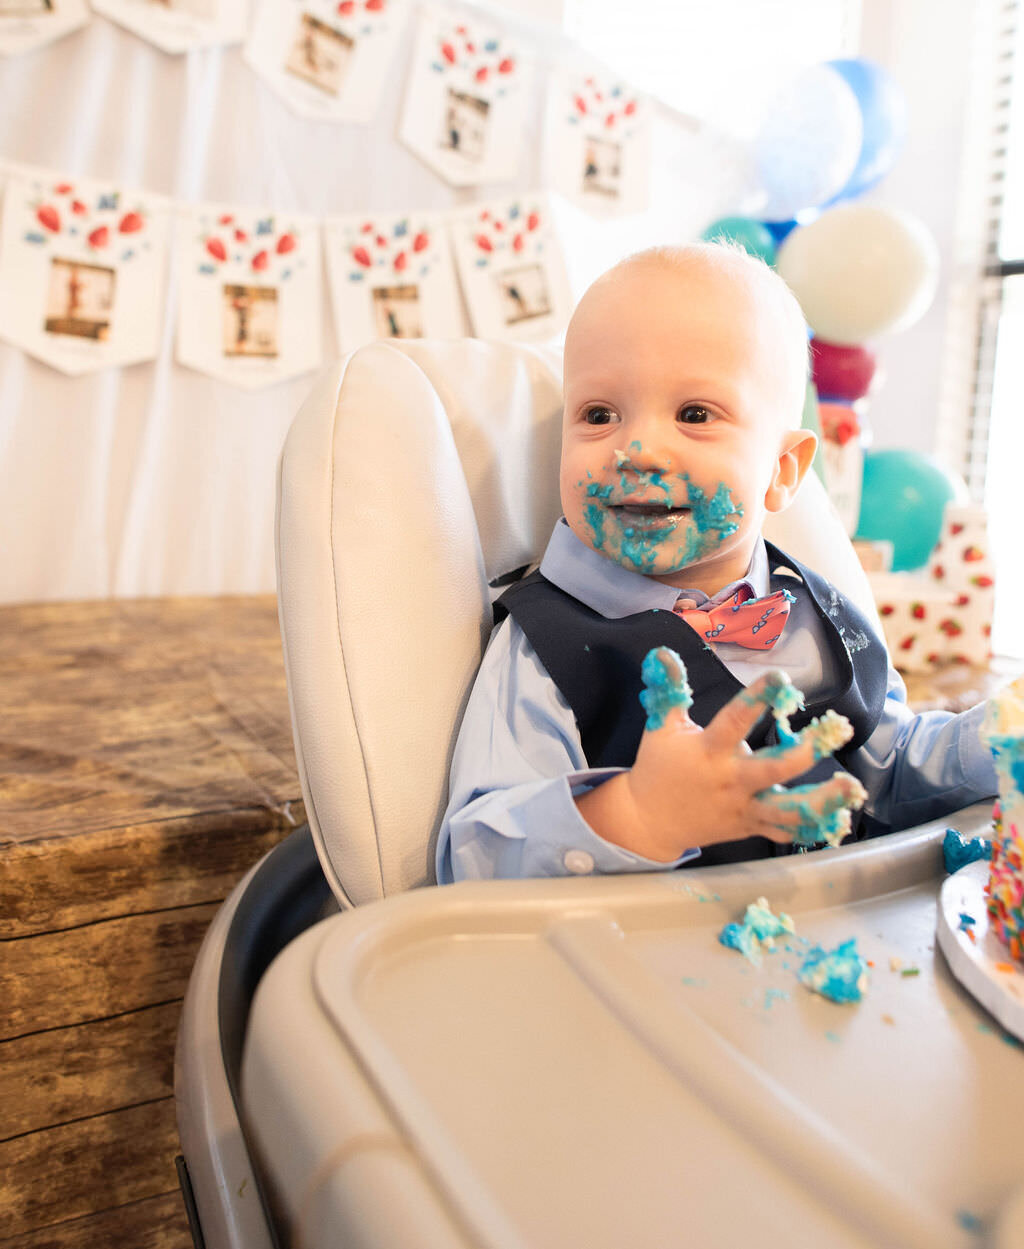 A baby smiling in a high chair covered in cake and blue frosting.